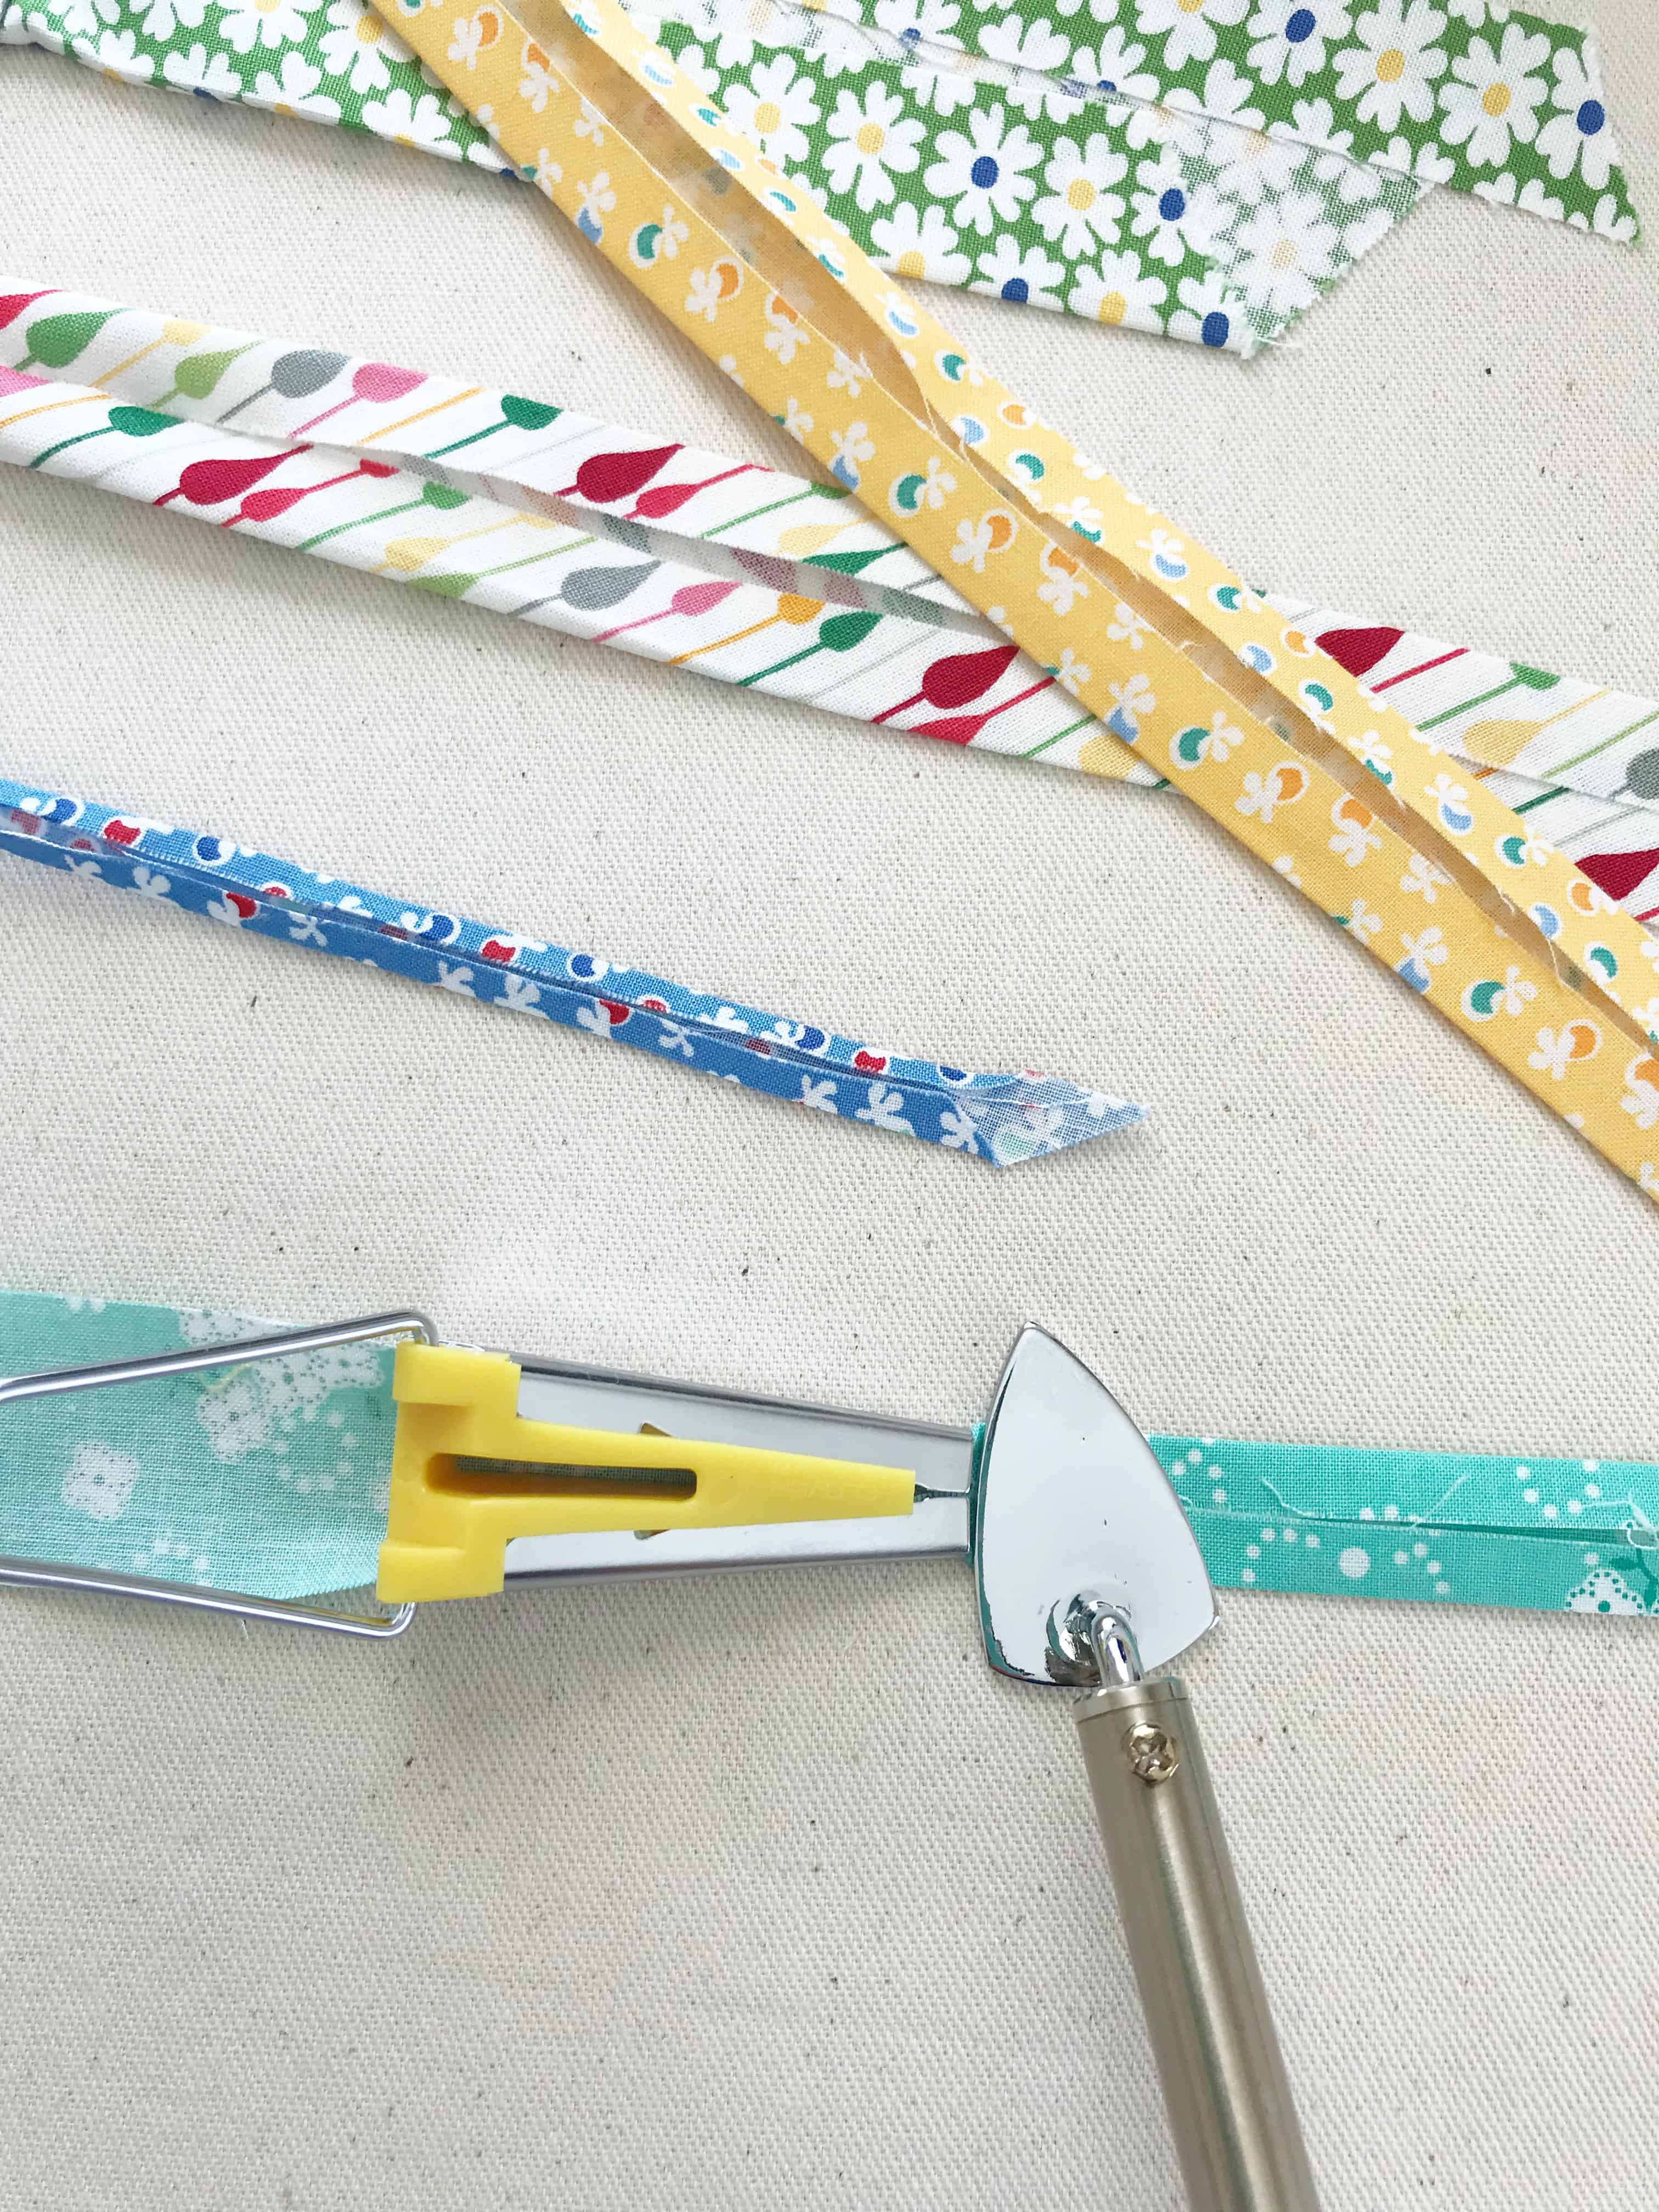 How to Use a Bias Tape Maker, Blog